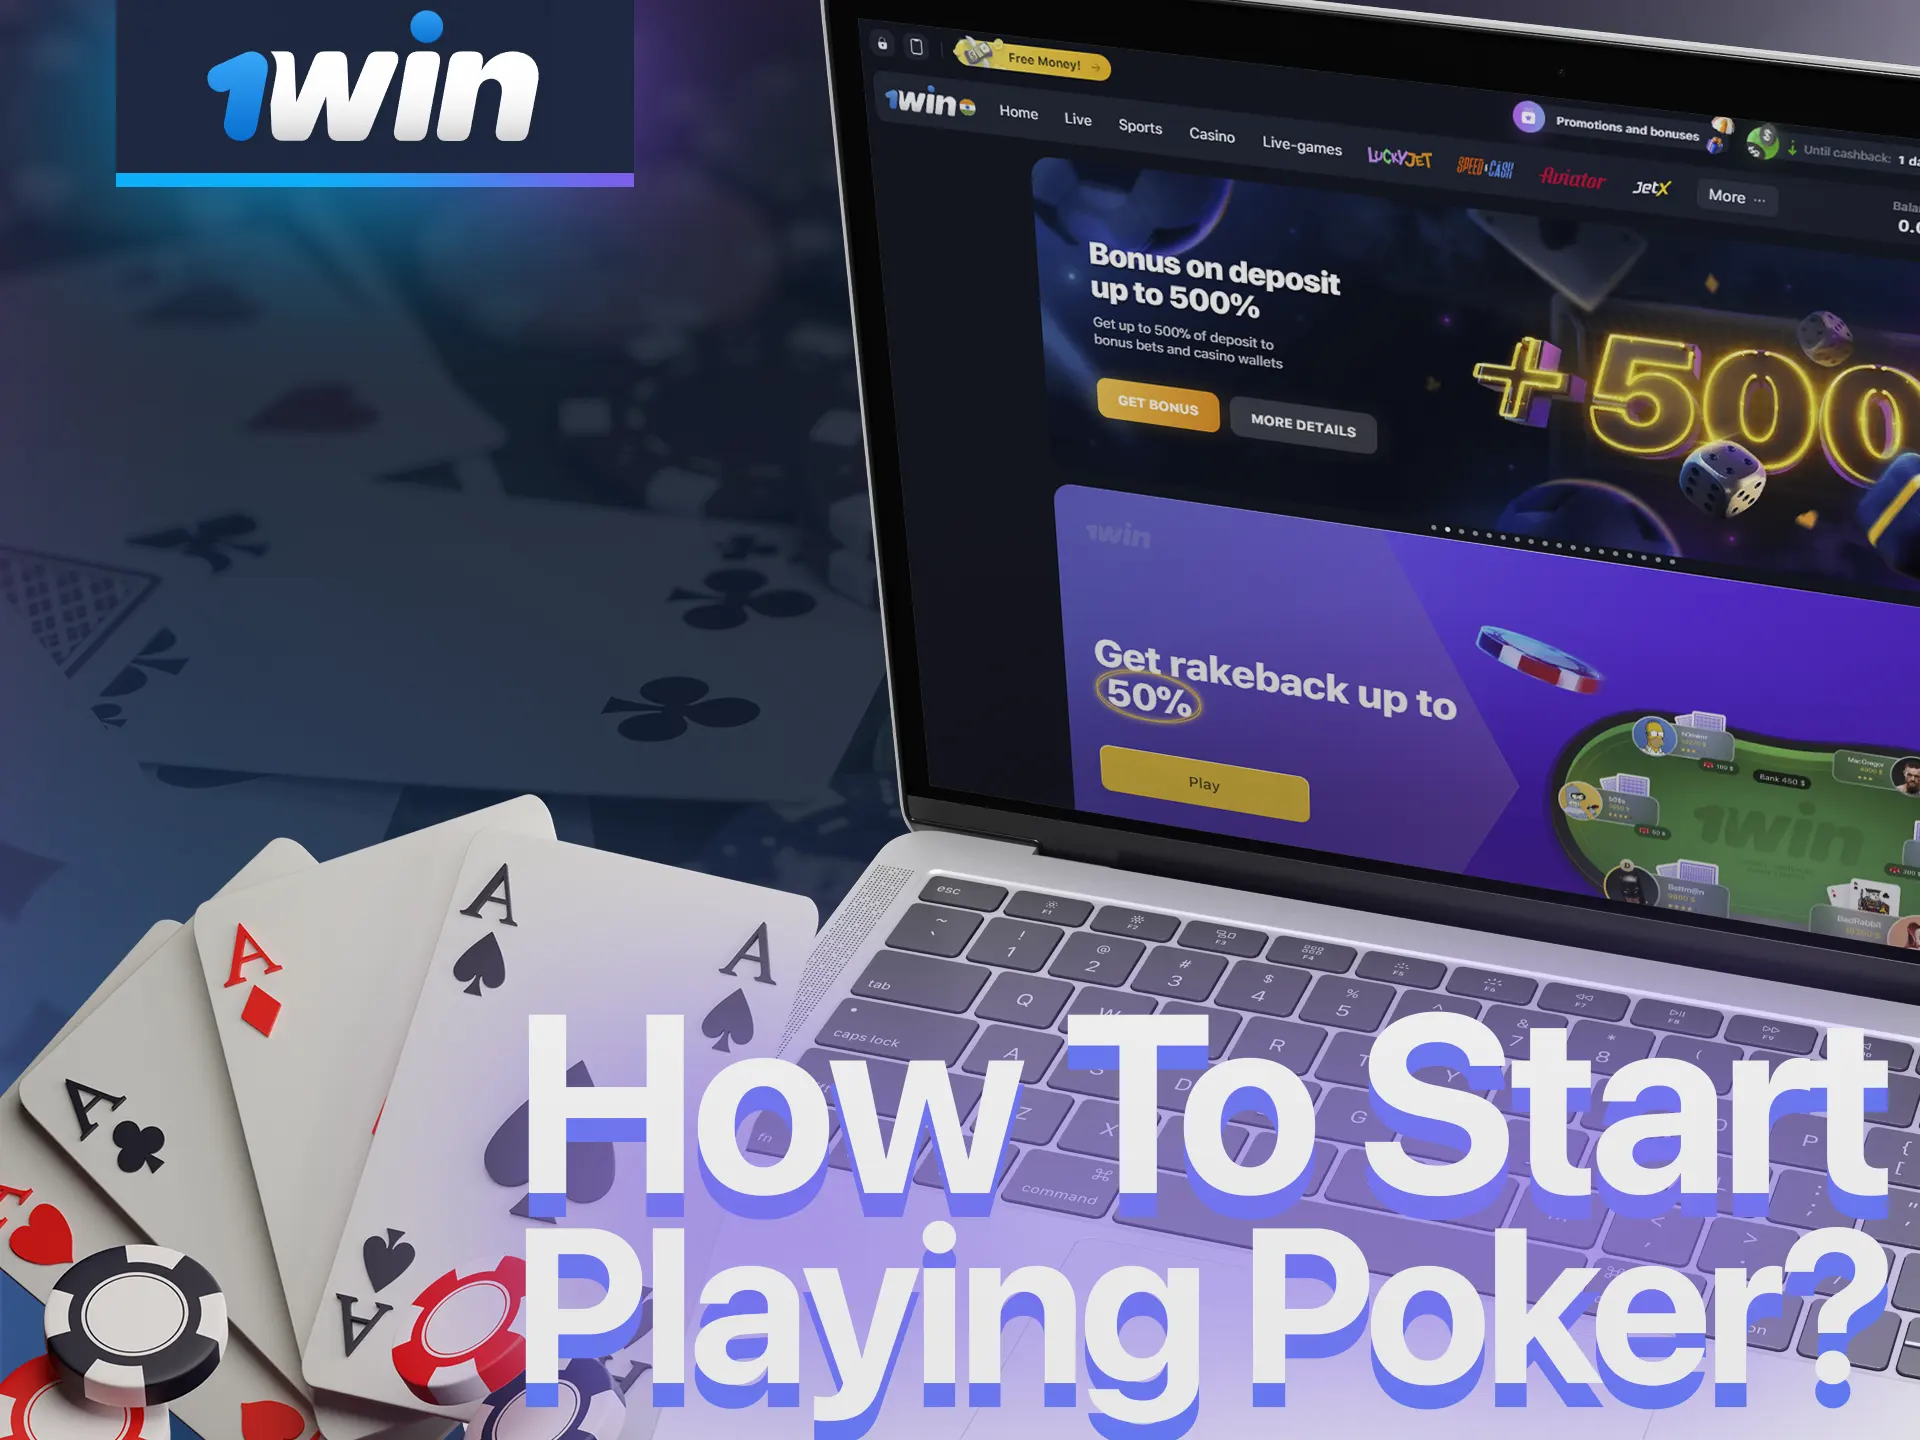 With 1Win, you can easily start playing poker.